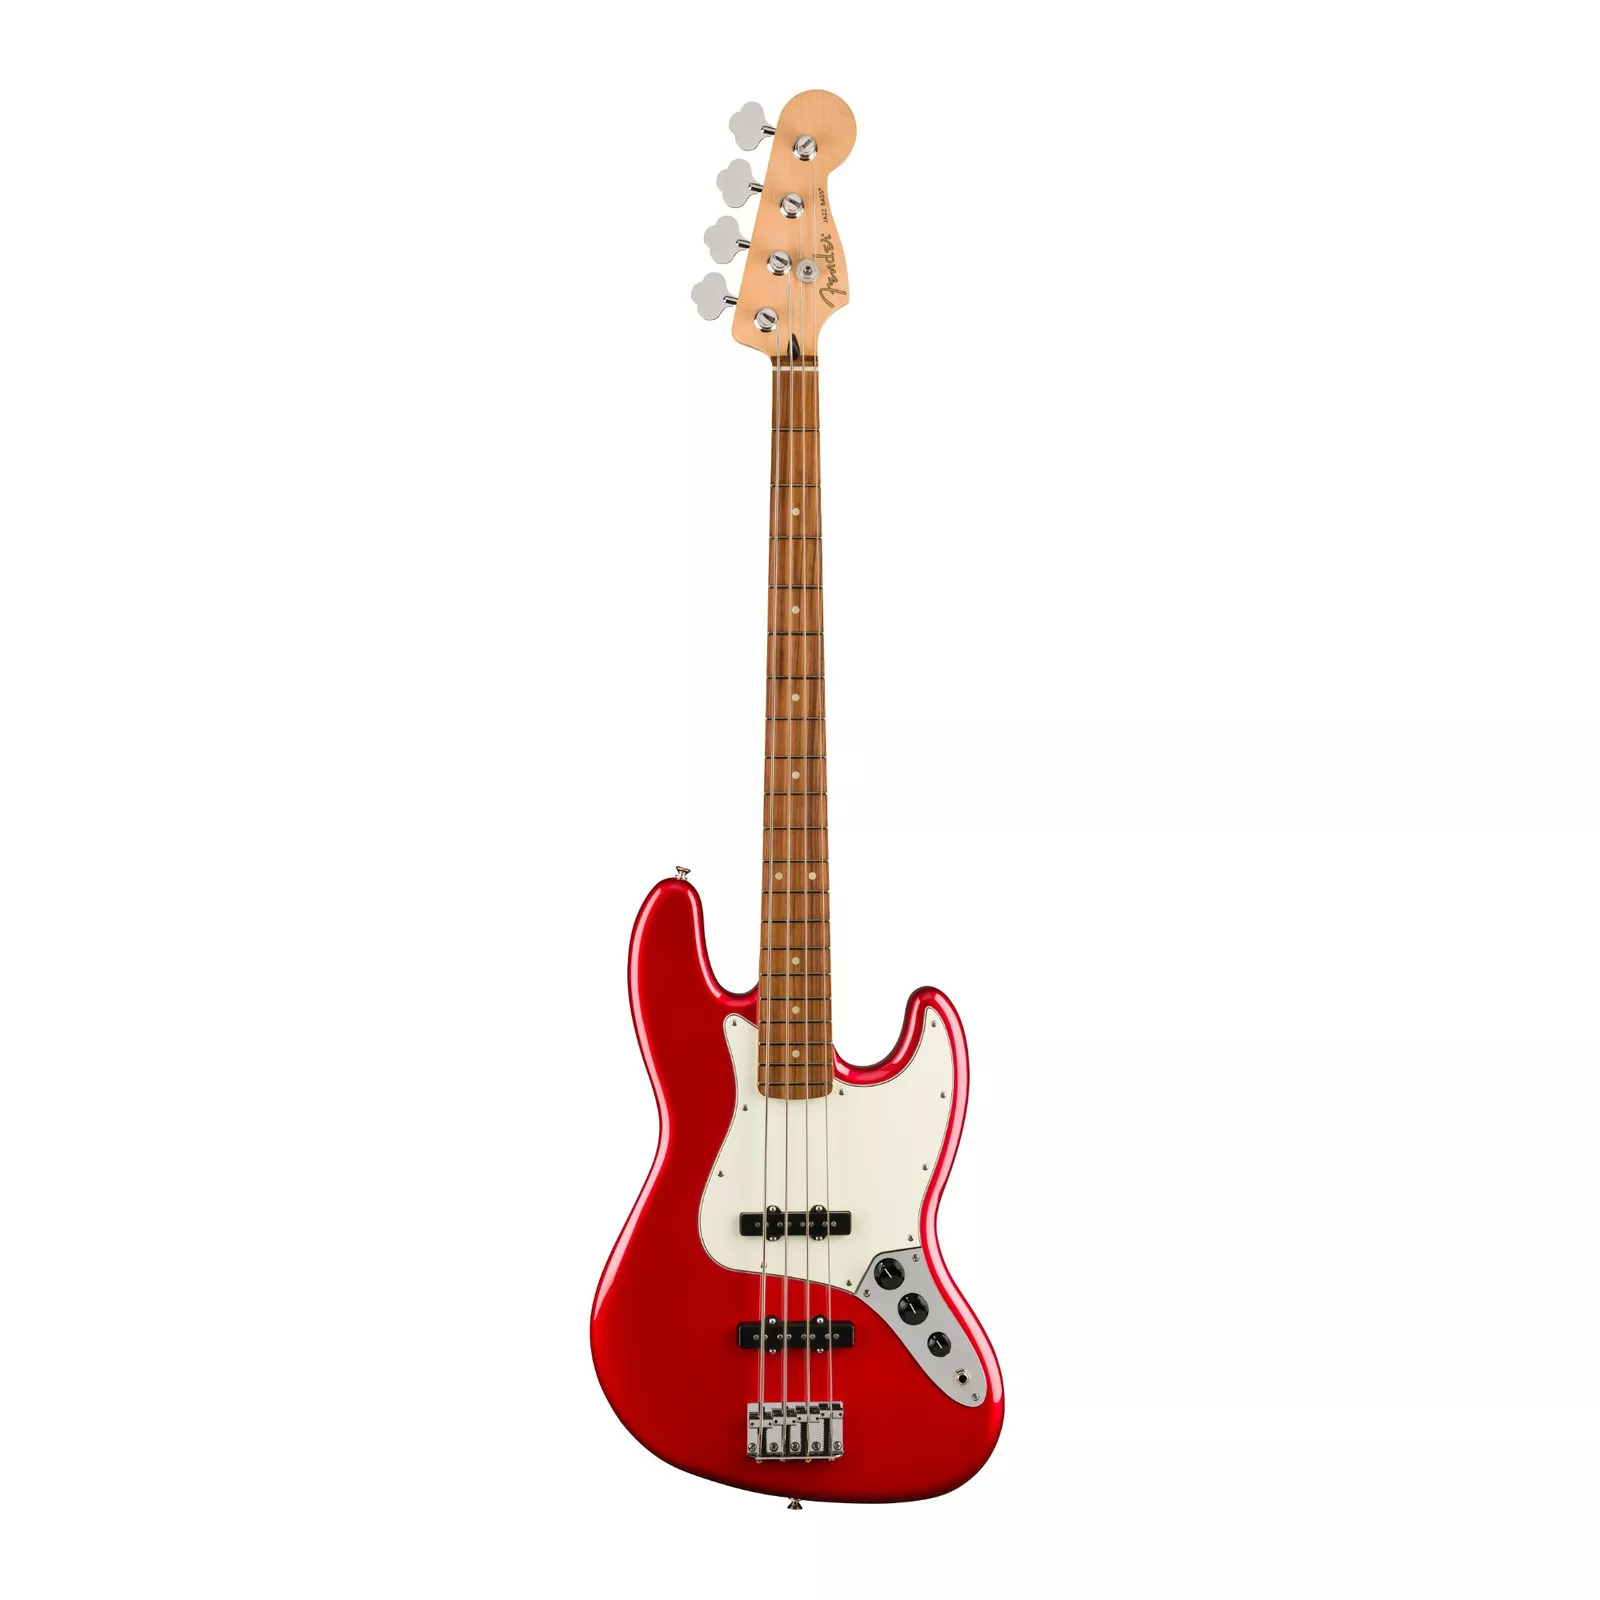 (Open Box) Fender Player Jazz Bass 4-String Guitar w/ Maple Neck (Candy Apple Red) & More $454 + Free Shipping